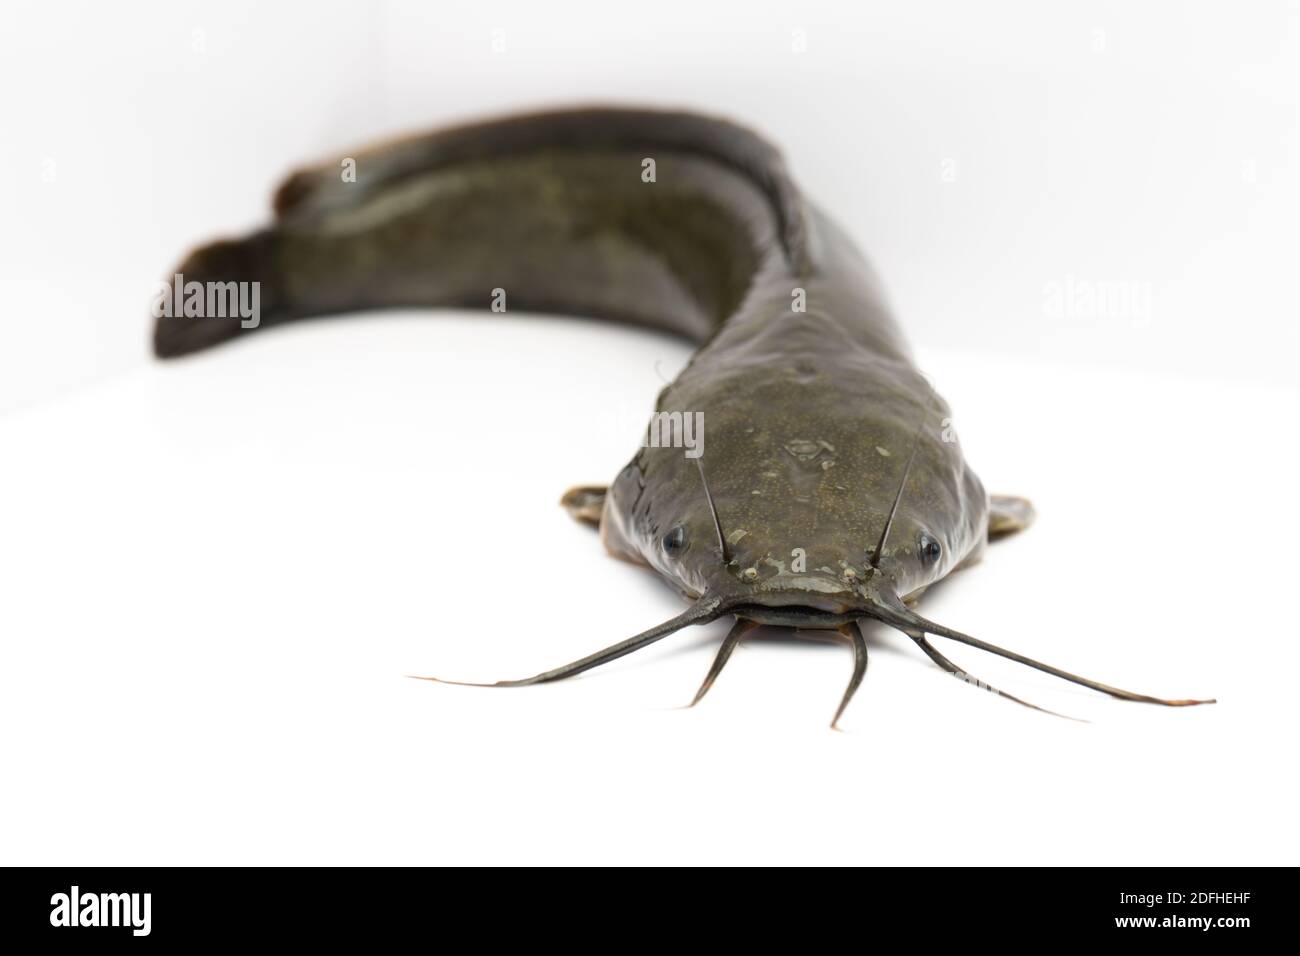 Big Oui Catfish, agriculture catfish isolated on a white background. Freshwater fish that are food and economic fish for fishermen in Thailand. Stock Photo